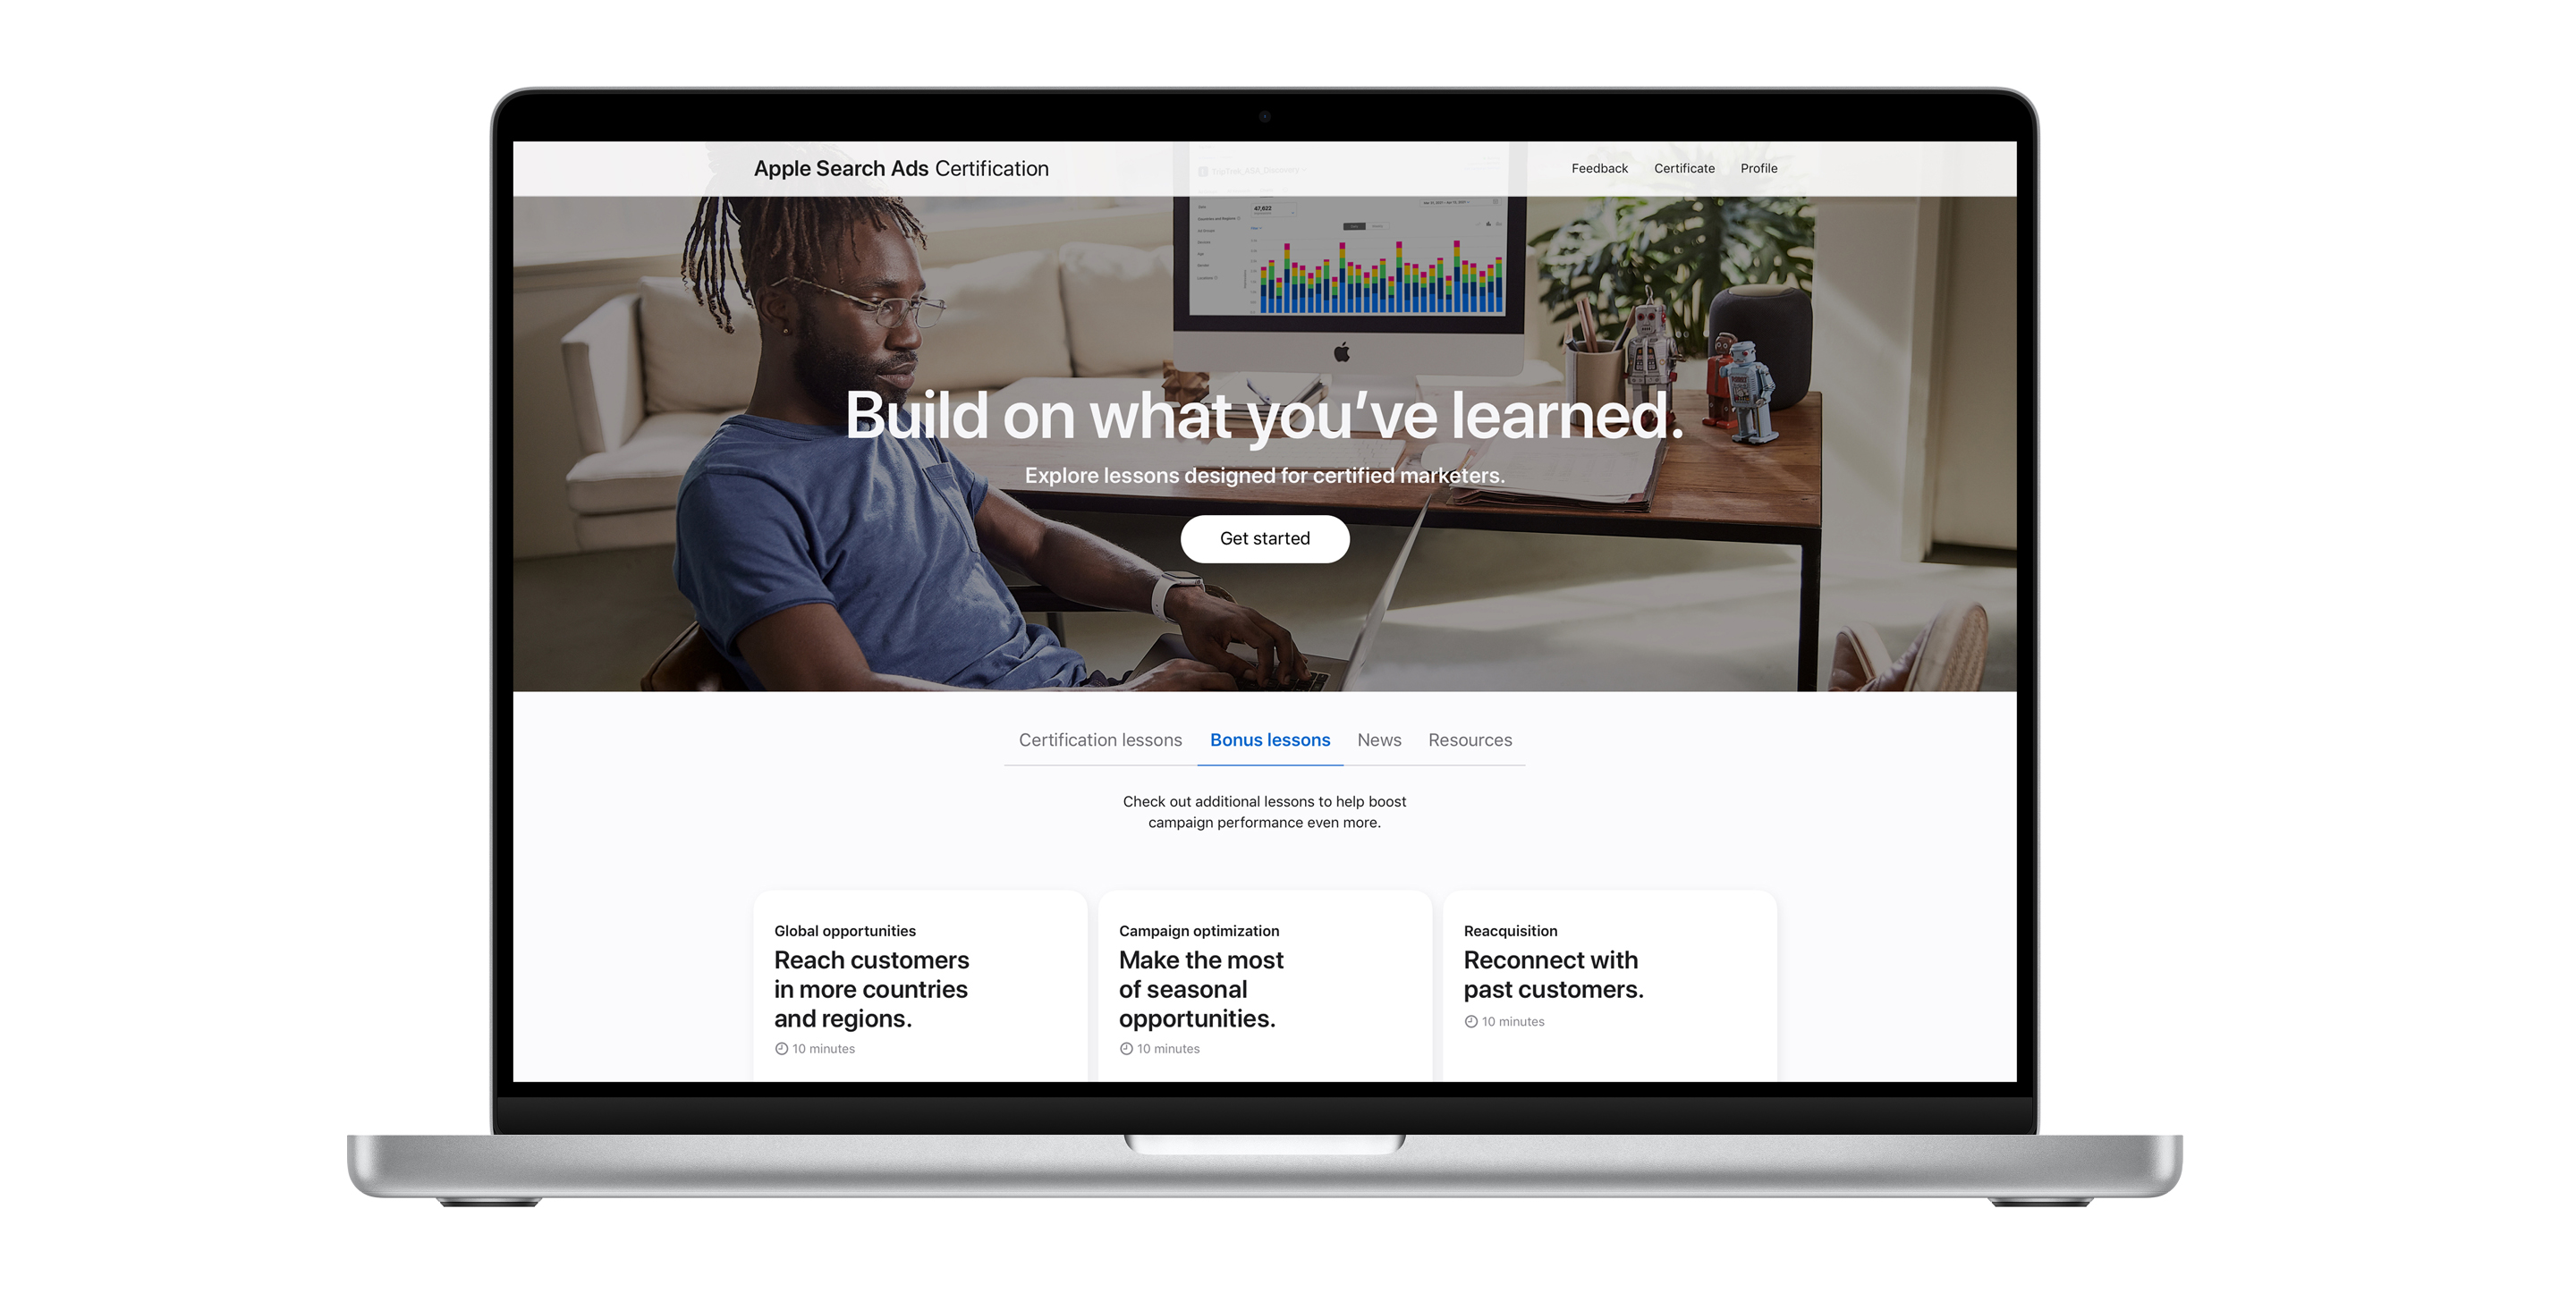 The Apple Search Ads Certification page showing the bonus lessons tab. It shows three lessons to help boost campaign performance.